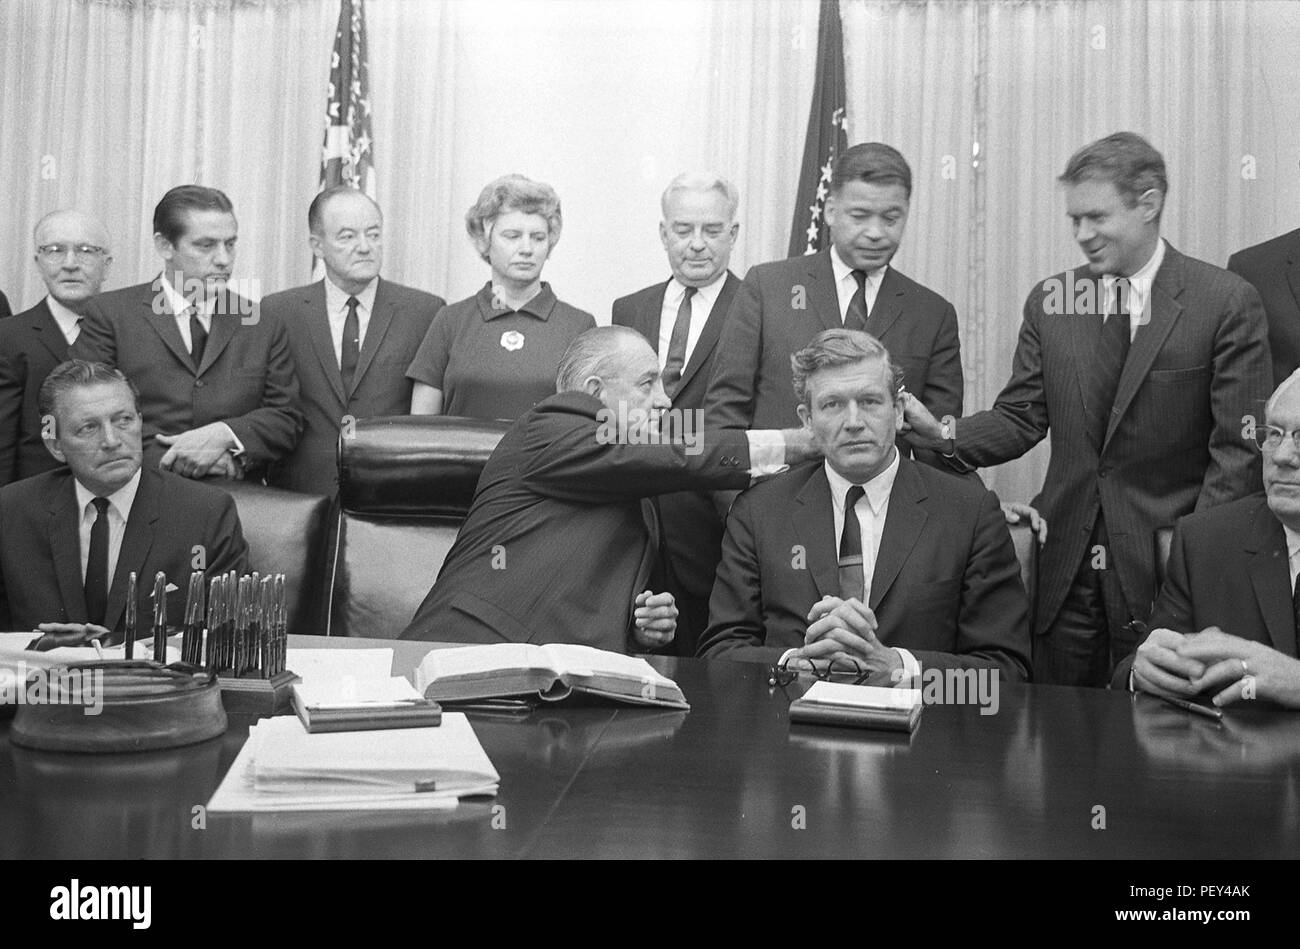 In this July 29, 1967, photo provided by the U.S. Library of Congress, President Lyndon B. Johnson interacts with members of the National Advisory Commission on Civil Disorders (Kerner Commission) in the White House. The commission's report, issued in 1968, detailed the root causes of racial tensions in America and provided guidelines to ease civil unrest in the U.S. The report called out unfair hiring practices across news agencies in America, helping to eliminate discriminatory hiring practices across the U.S. mass media. (Photo courtesy Library of Congress) Stock Photo